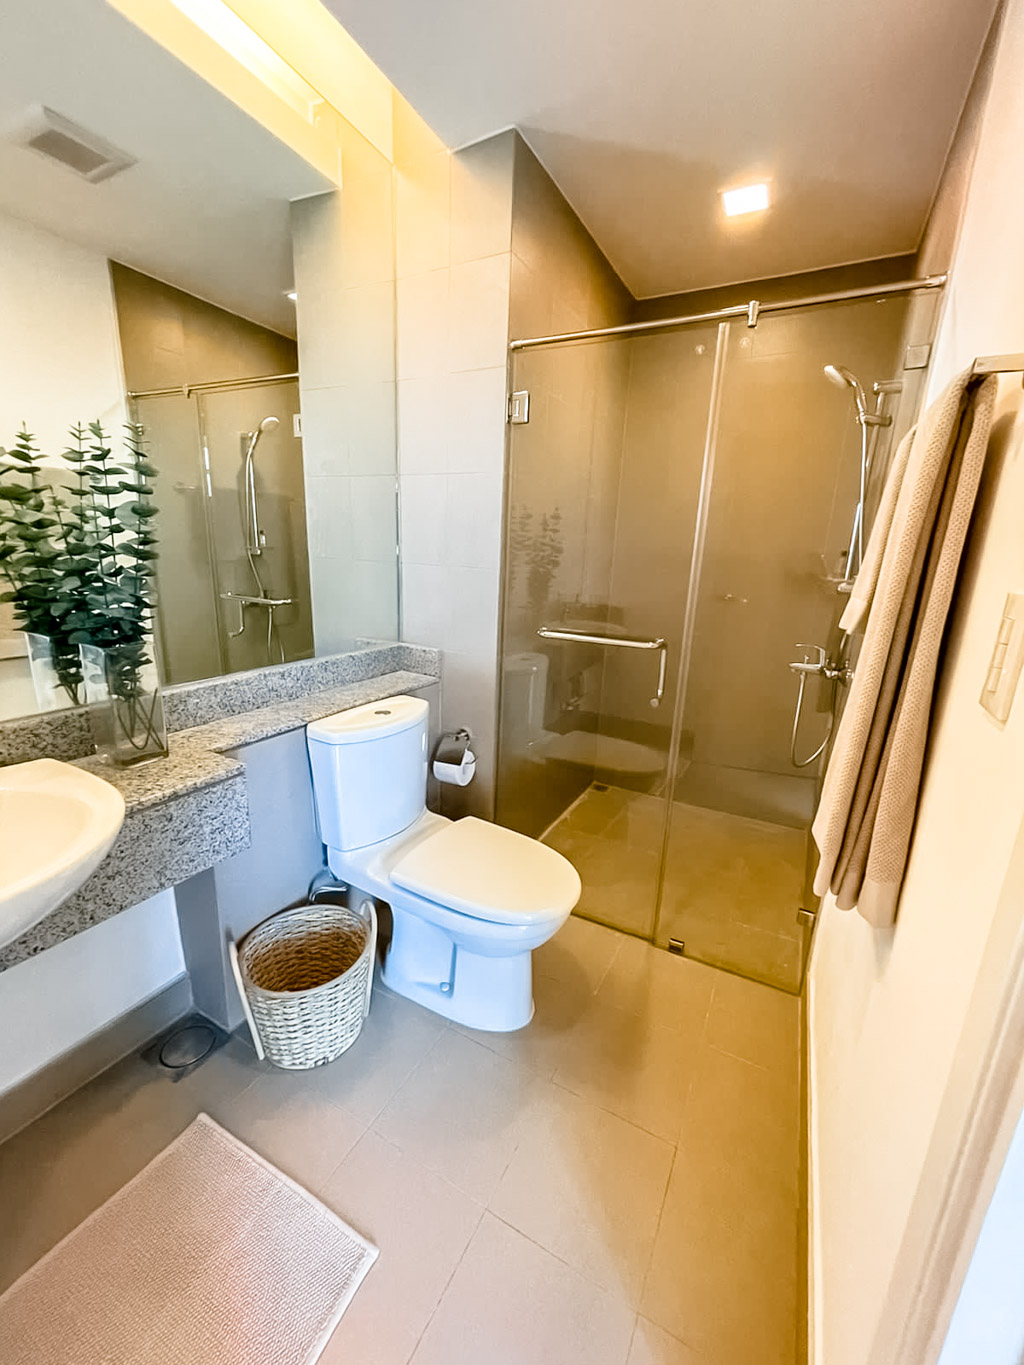 RCTS21 Furnished 2 Bedroom Condo for Rent in 1016 Residences - 12